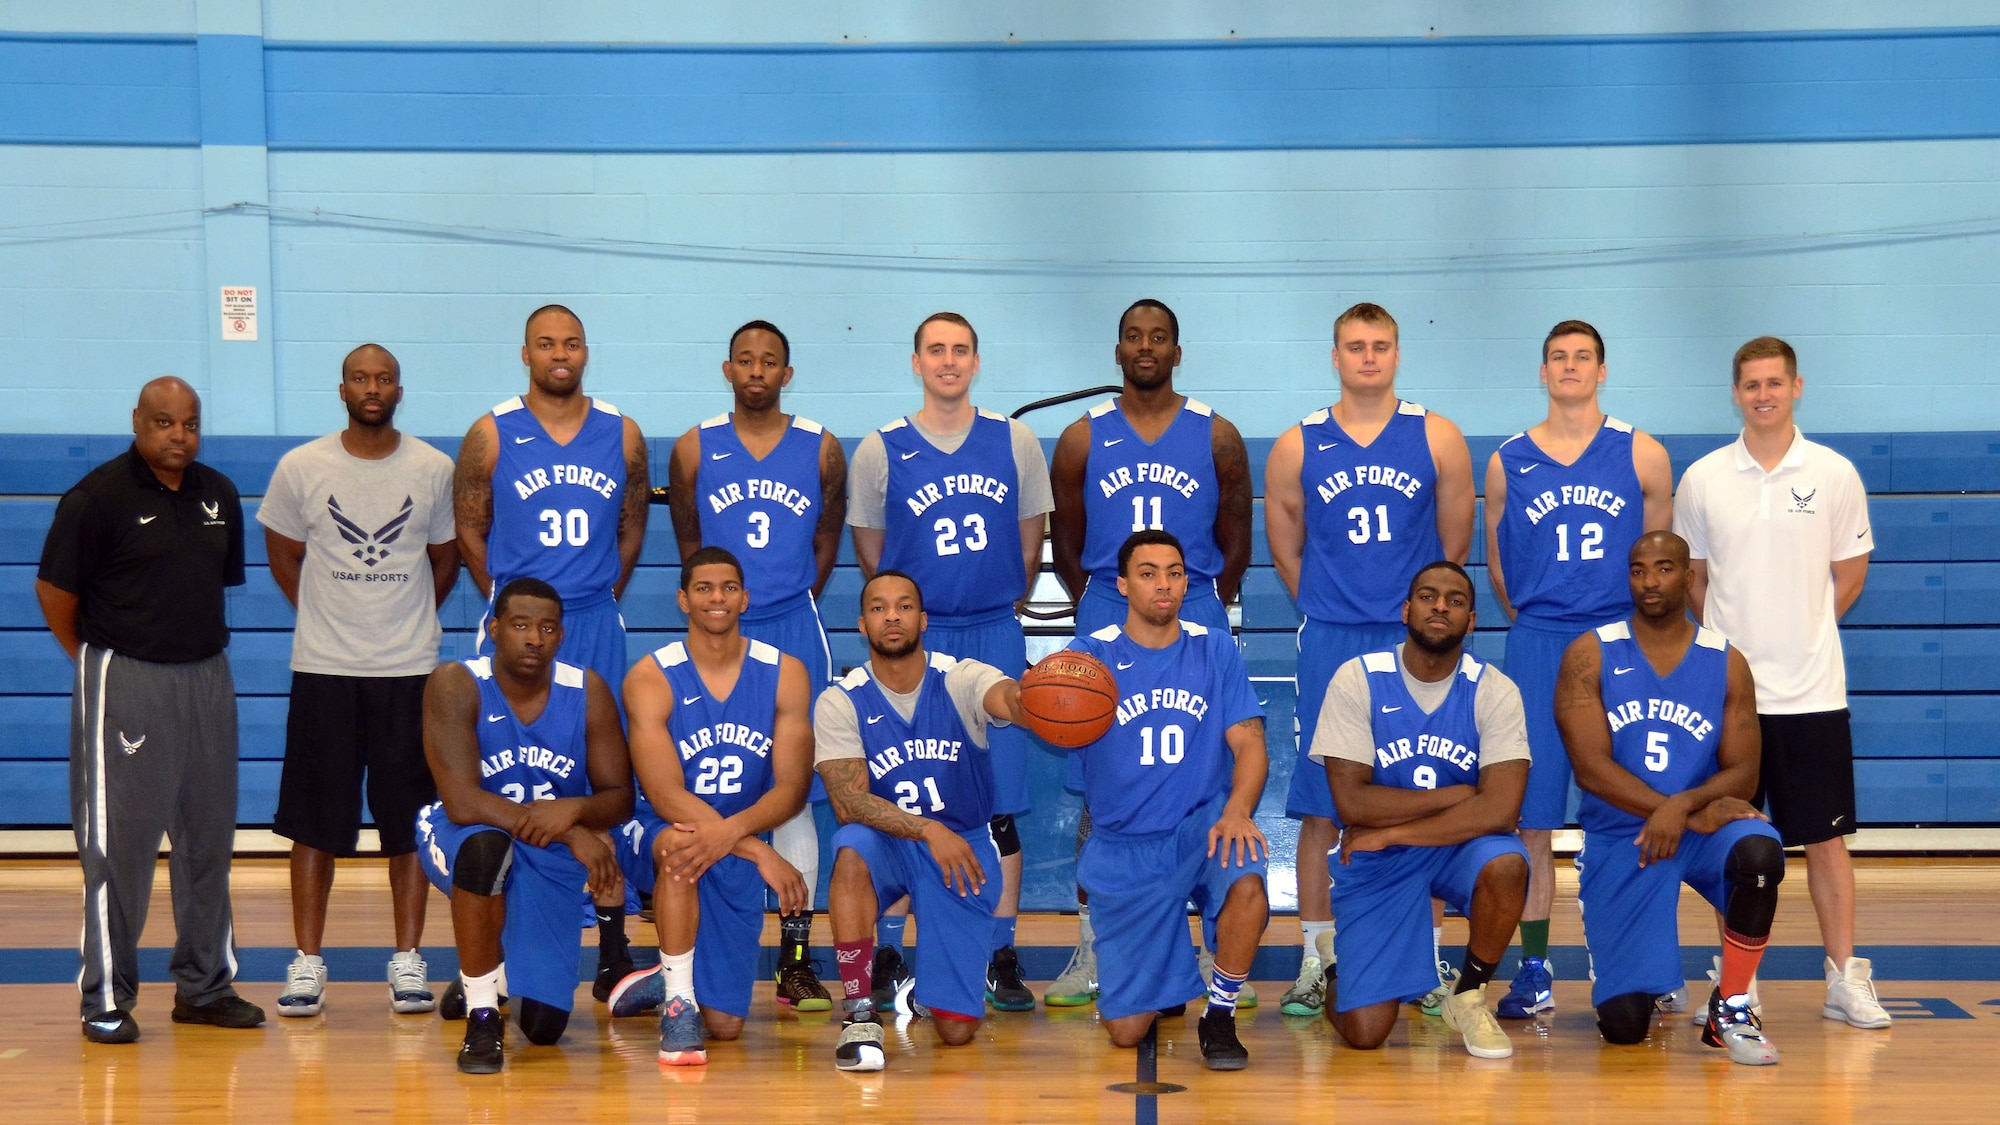 The All-Air Force men's basketball team, seeking its ninth consecutive Armed Forces championship, finalized its 12-man roster before the Armed Forces Tournament, which runs Oct. 31-Nov. 8, at Marine Corps Base Quantico, Virginia. Members are: (kneeling, from left): Senior Airman Gregory Wilson of Joint Base Langley-Eustis, Virginia; Senior Airman Travares Peterson of Joint Base Andrews, Maryland; Senior Airman Daveon Allen of Nellis Air Force Base; Nevada; Senior Airman Anthony Morris of Maxwell Air Force Base, Alabama; Staff Sgt. Brian Washington of Hurlburt Field, Florida; Staff Sgt. James Lewis of Spangdahlem Air Base, Germany; (top row, from left): trainer Michael Richardson of JBSA Lackland, Texas; assistant coach Tech Sgt. Roderick Green of JBSA-Lackland; Senior Airman Jahmal Lawson of Aviano Air Base, Italy; Senior Airman Darian Donald of Misawa Air Base; Japan; 1st Lt. Michael Fitzgerald of Hanscom Air Force Base, Massachusetts; Staff Sgt. Anthony McDowel of MacDill Air Force Base, Florida; 1st Lt. Chase Kammerer of Eglin Air Force Base, Florida; 2nd Lt. Scott Adler of Eglin AFB; and head coach Capt. Scott Stucky of Wright-Patterson Air Force Base, Ohio. (U.S. Air Force photo by Steve Warns)